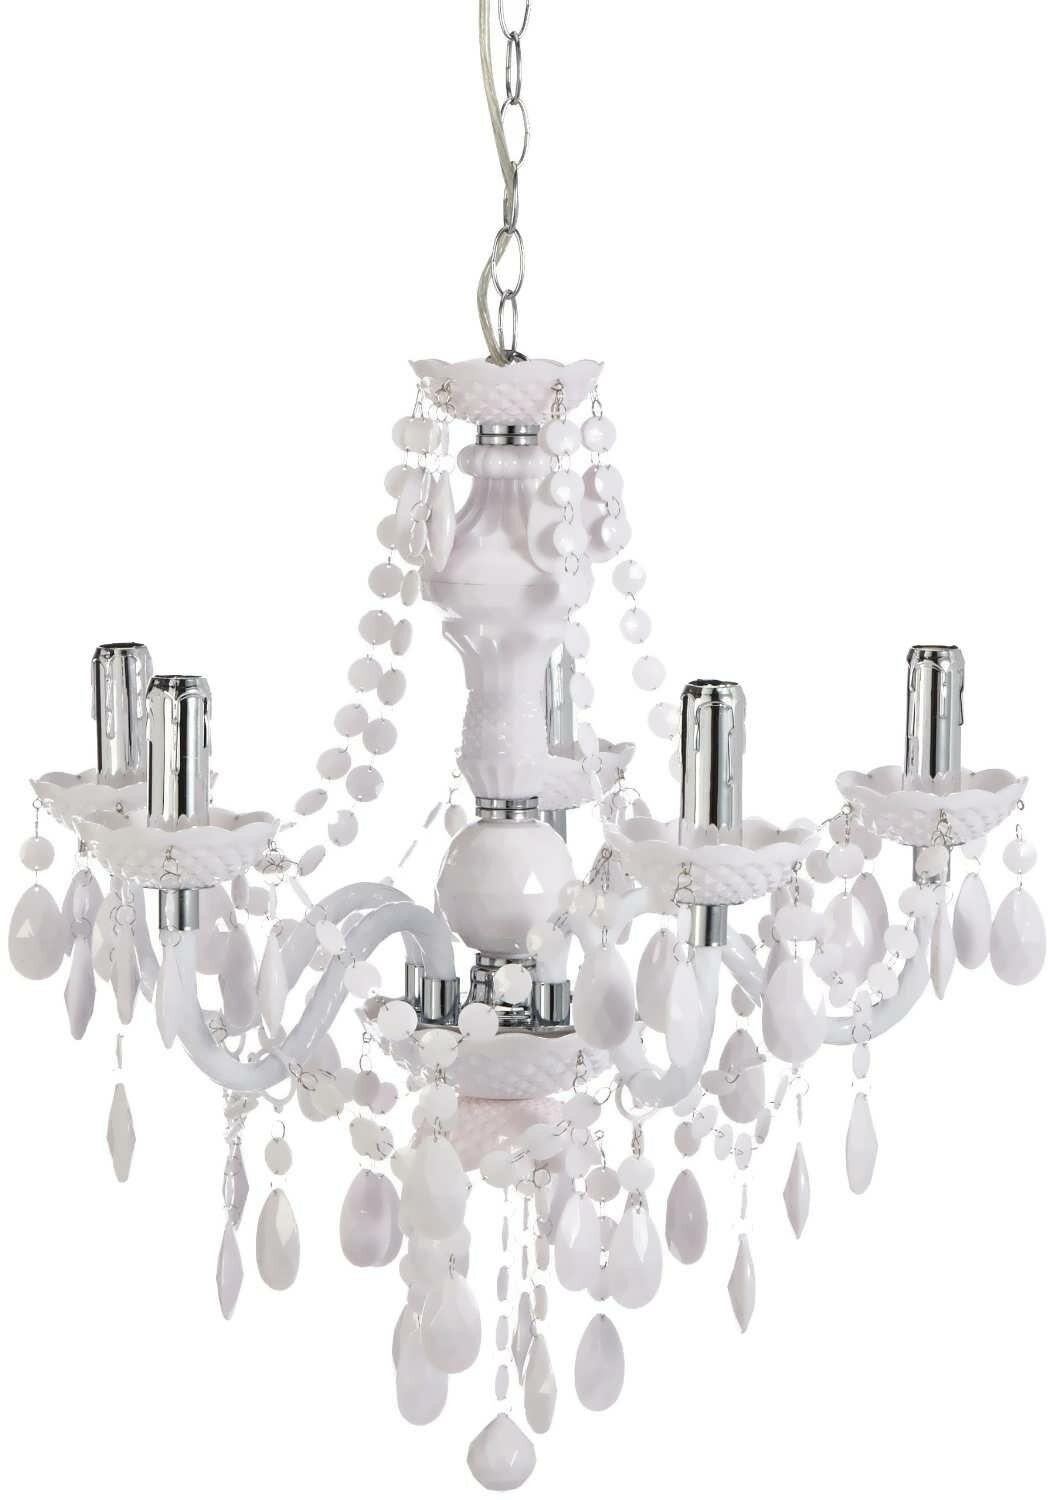 Chandelier Globe Replacements | Glass Chandelier Shades | Clear Glass Lamp Shades Replacement